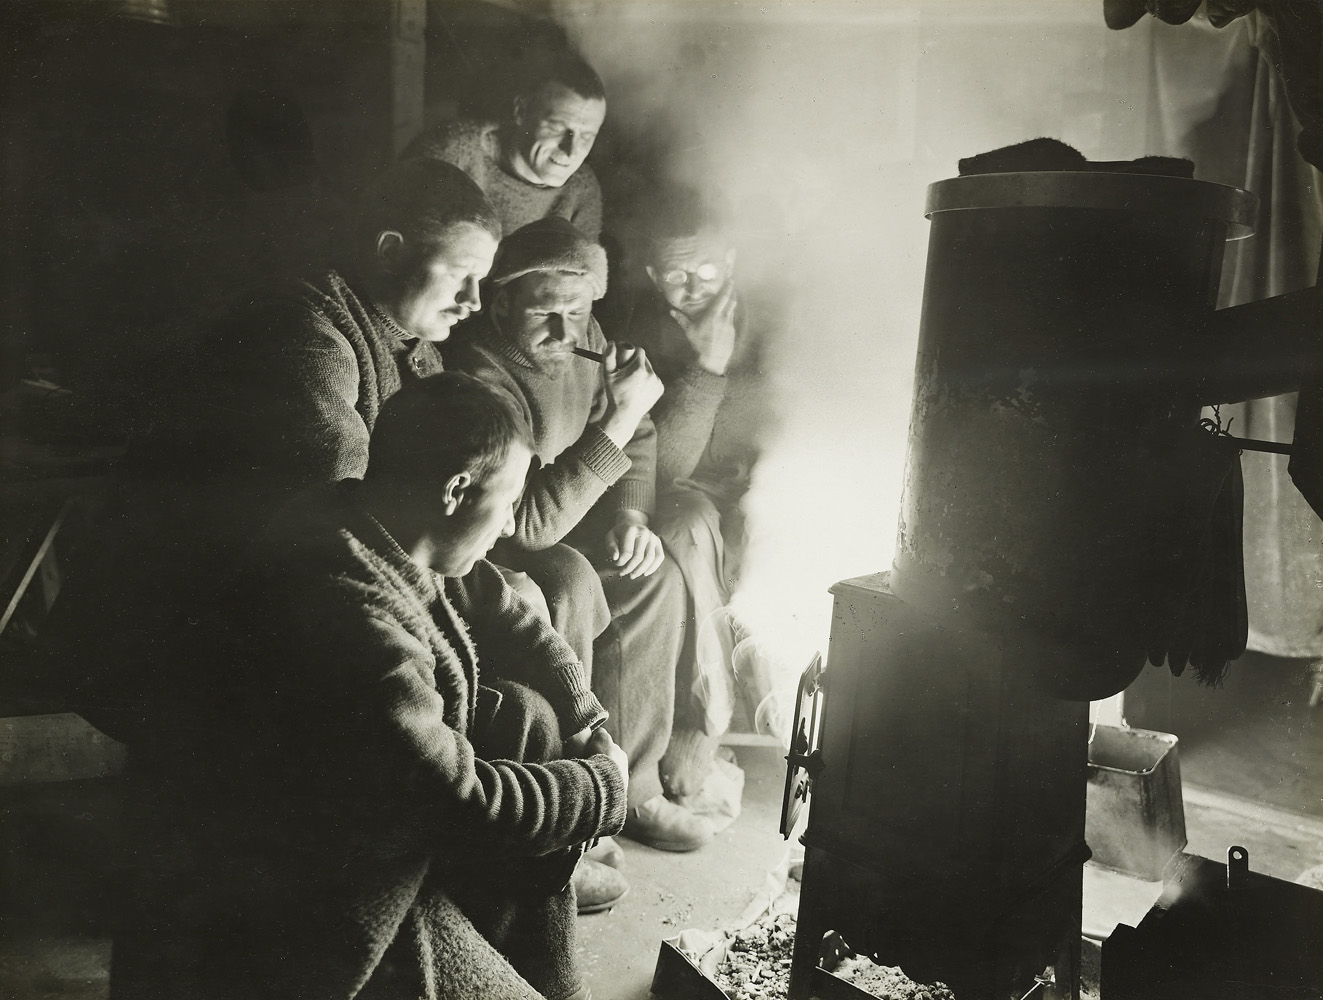 The night watchman, with little to do, apart from observing ice movements, gathers with the men around the fire to share stories in 1915.